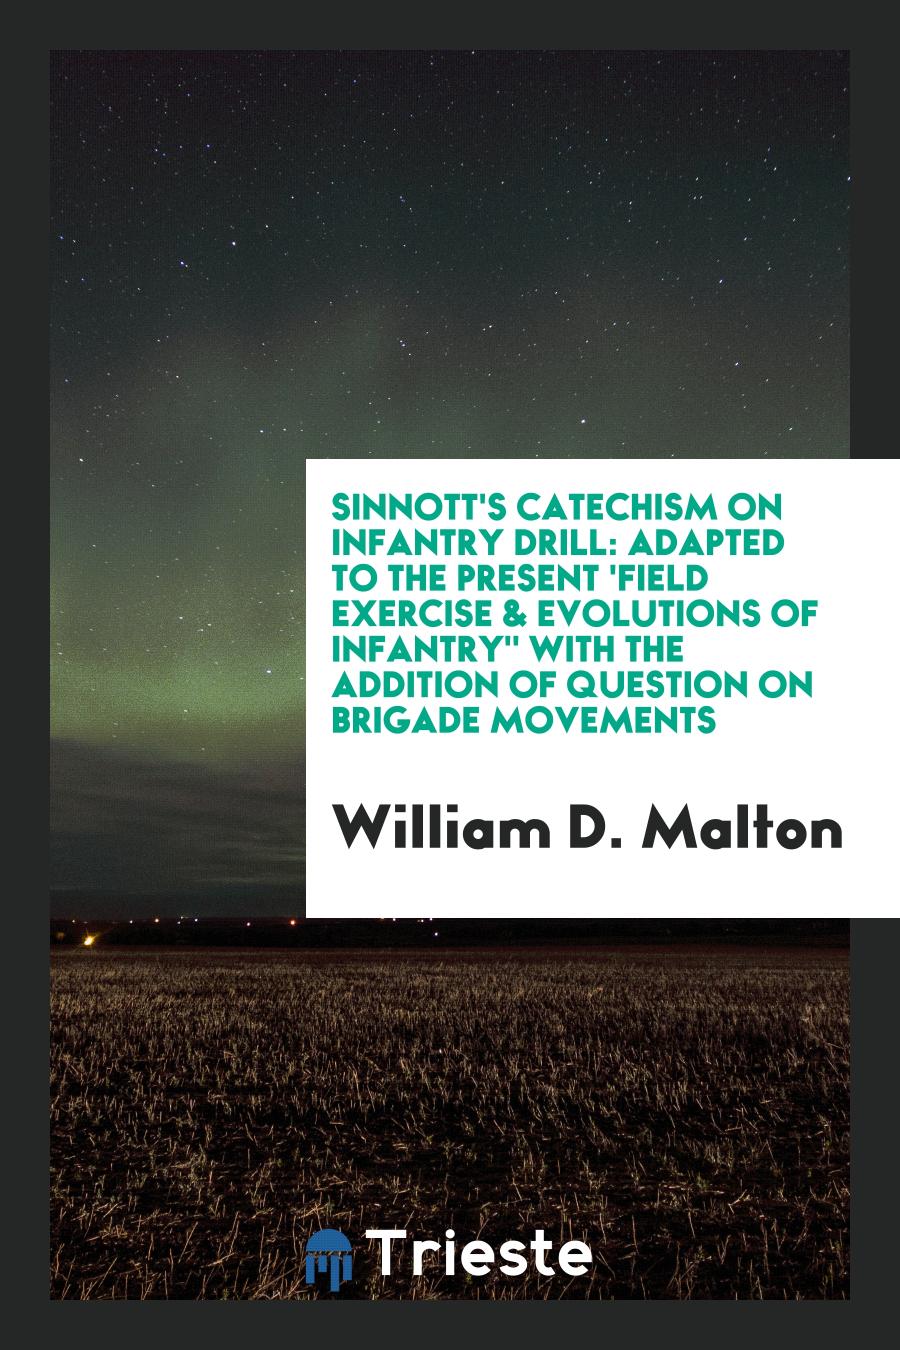 Sinnott's Catechism on Infantry Drill: Adapted to the Present 'Field Exercise & Evolutions of Infantry" with the Addition of Question on Brigade Movements